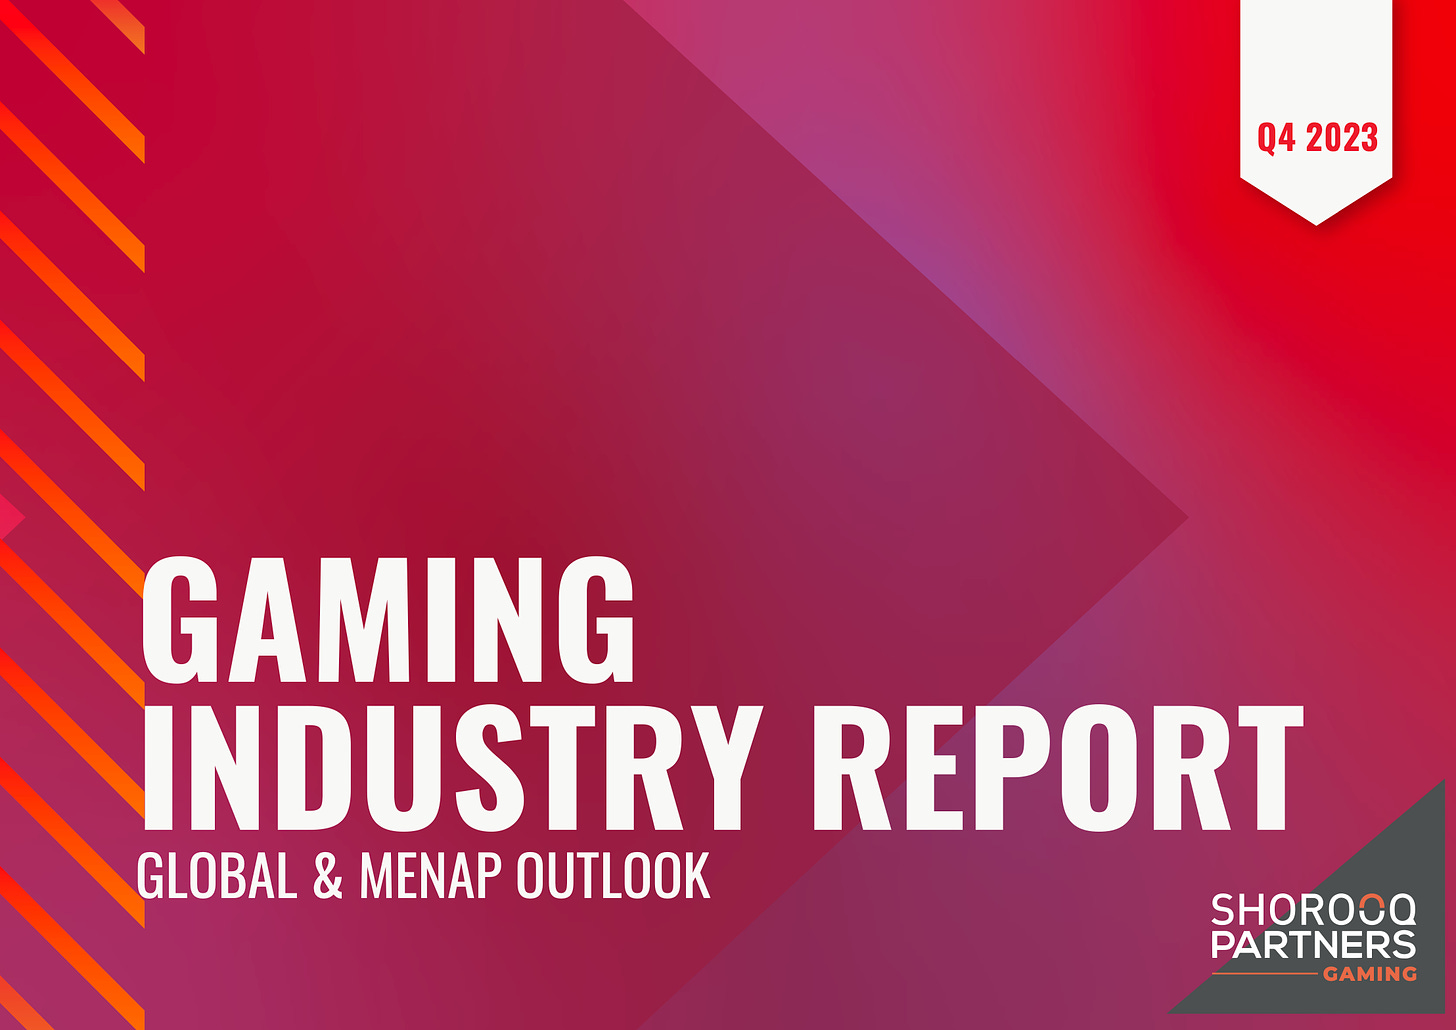 gaming industry report global and menap outlook q4 2023